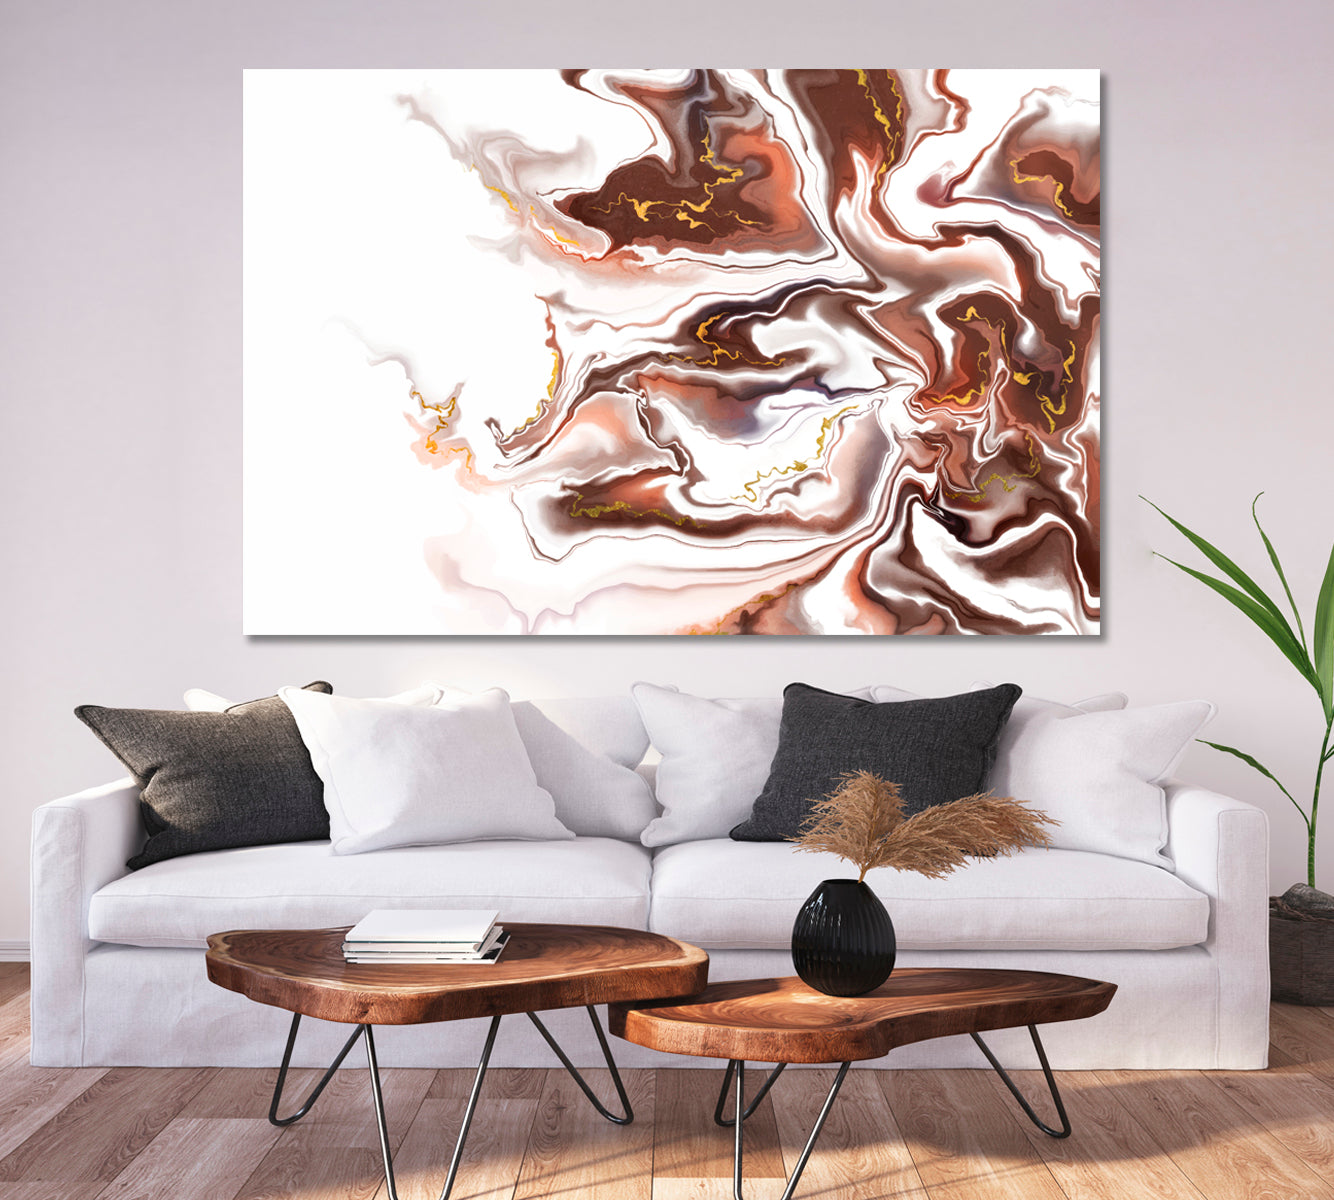 Brown Abstract Wavy Forms Futuristic Pattern Fluid Art, Oriental Marbling Canvas Print Artesty 1 panel 24" x 16" 